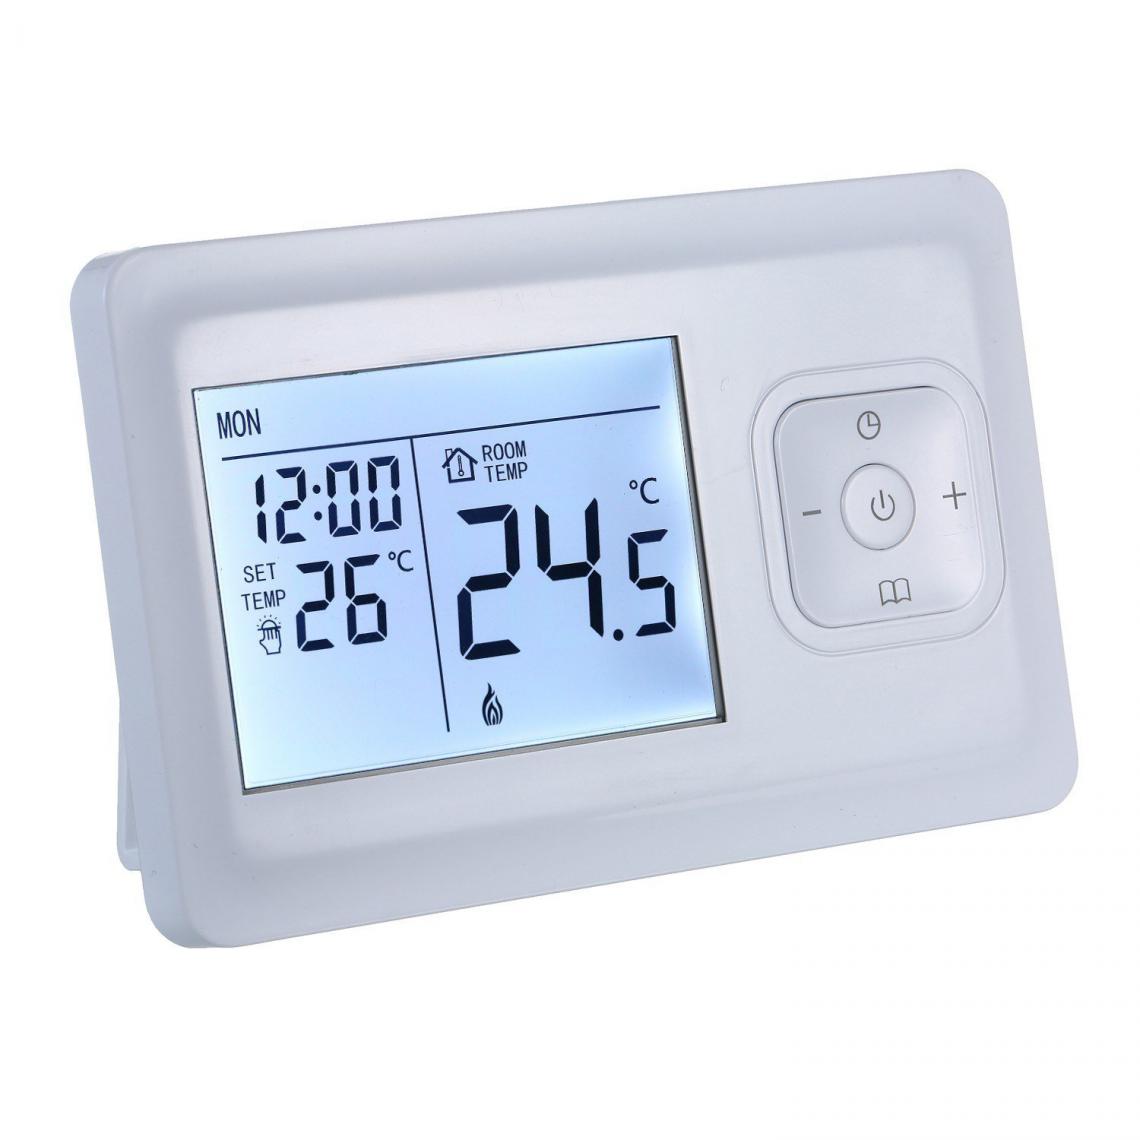 Justgreenbox - Thermostat de chauffage numérique LCD Four mural programmable Wifi - 1005001447279262 - Thermostat